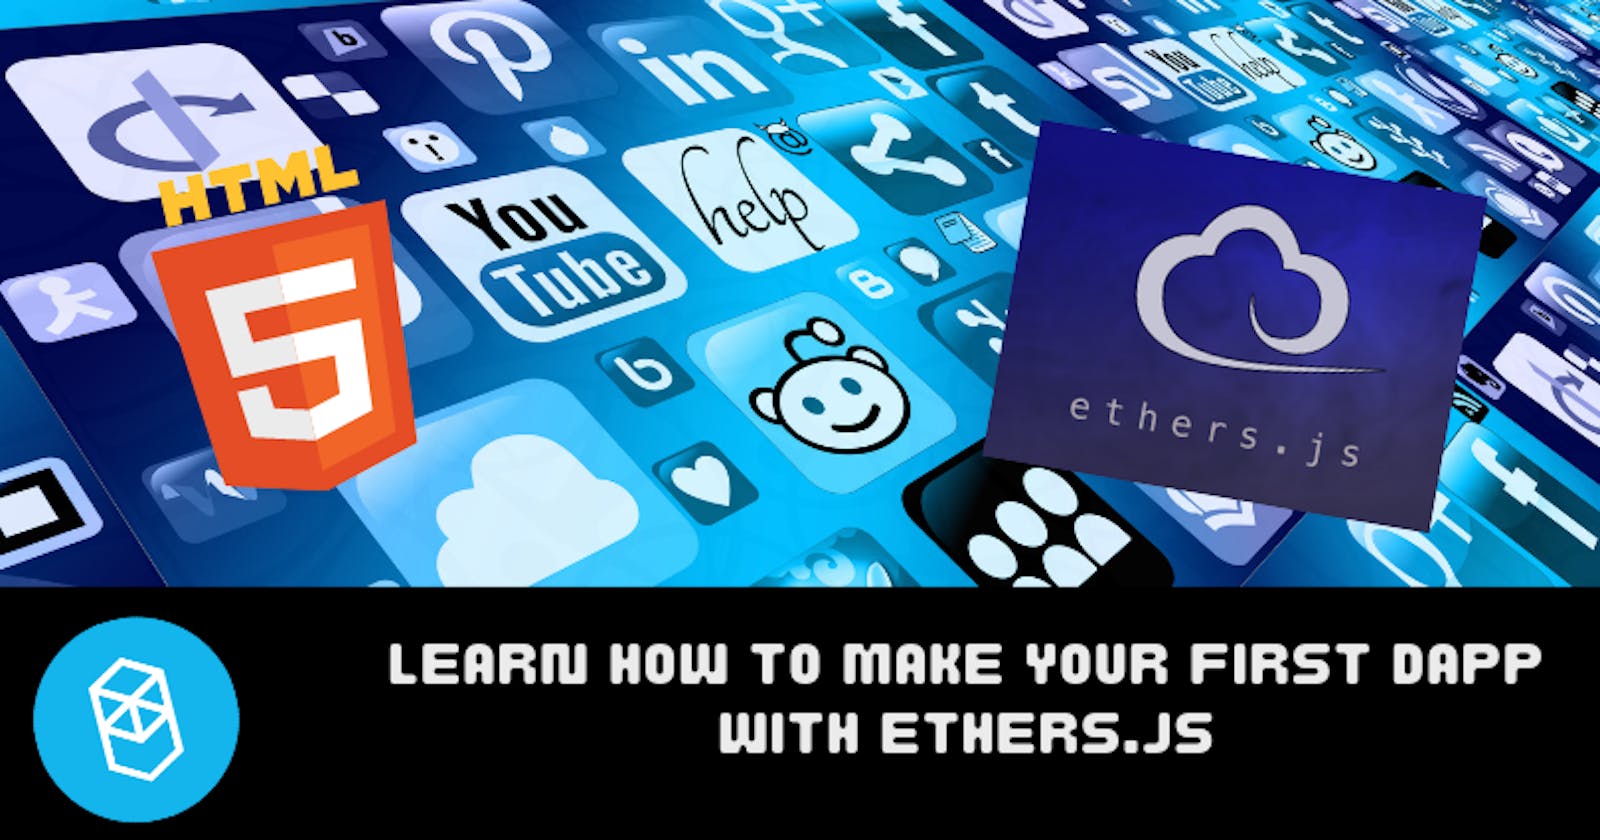 Create your first DApp using Ethers.js